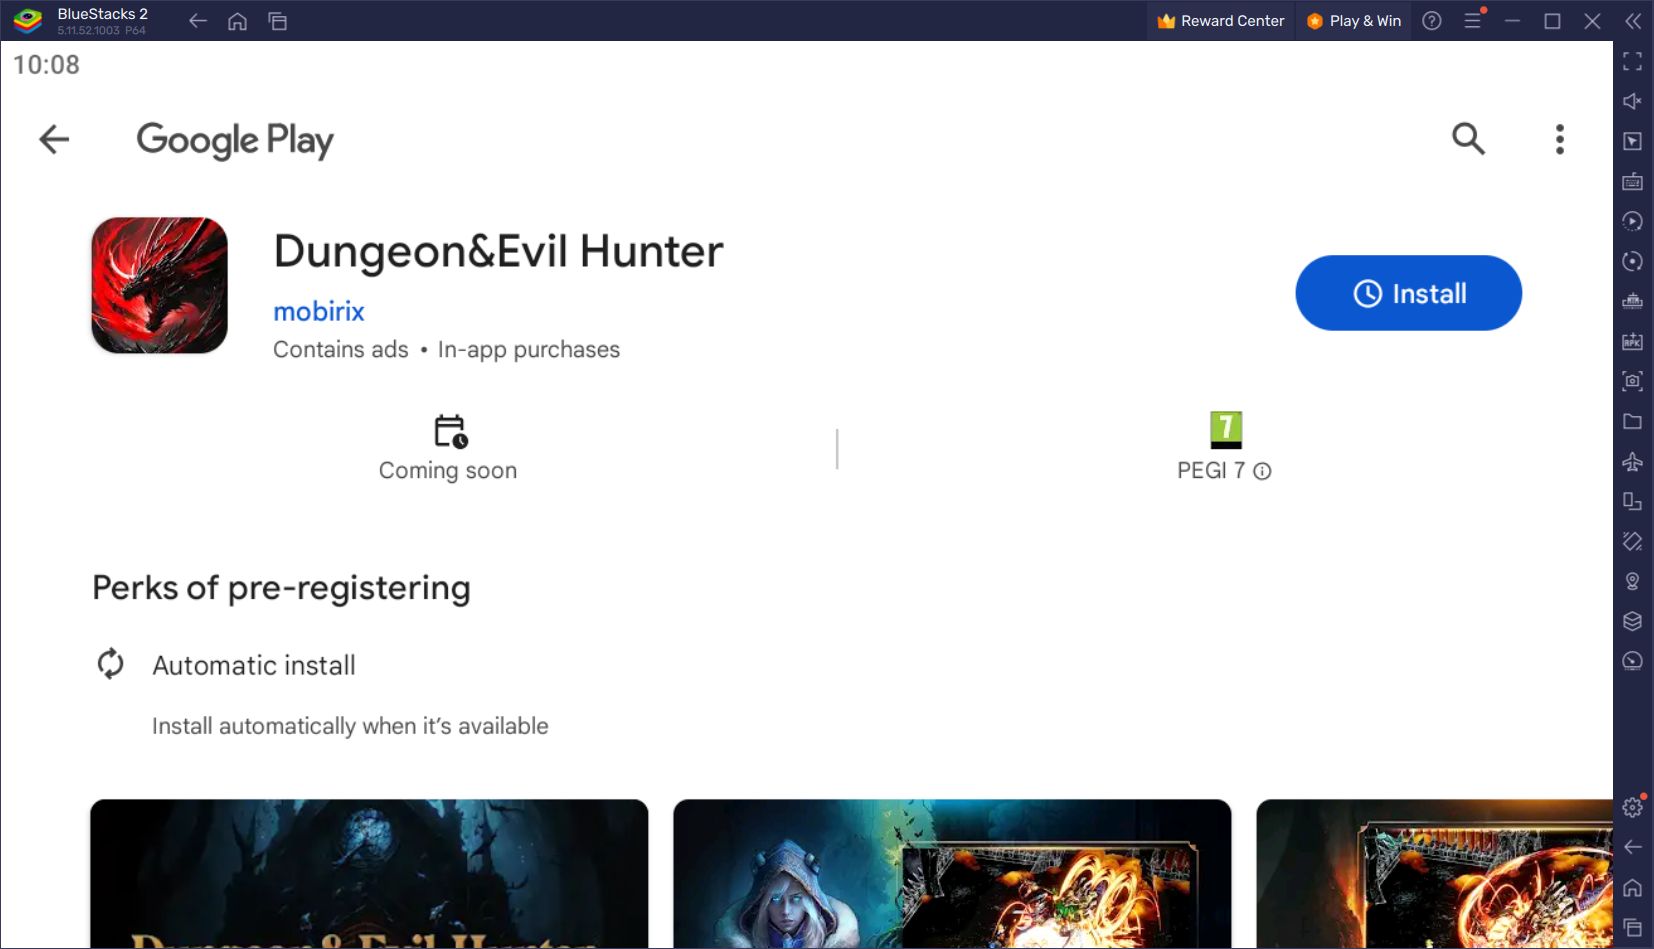 Gather Your Party and Play Dungeon&Evil Hunter on PC with BlueStacks